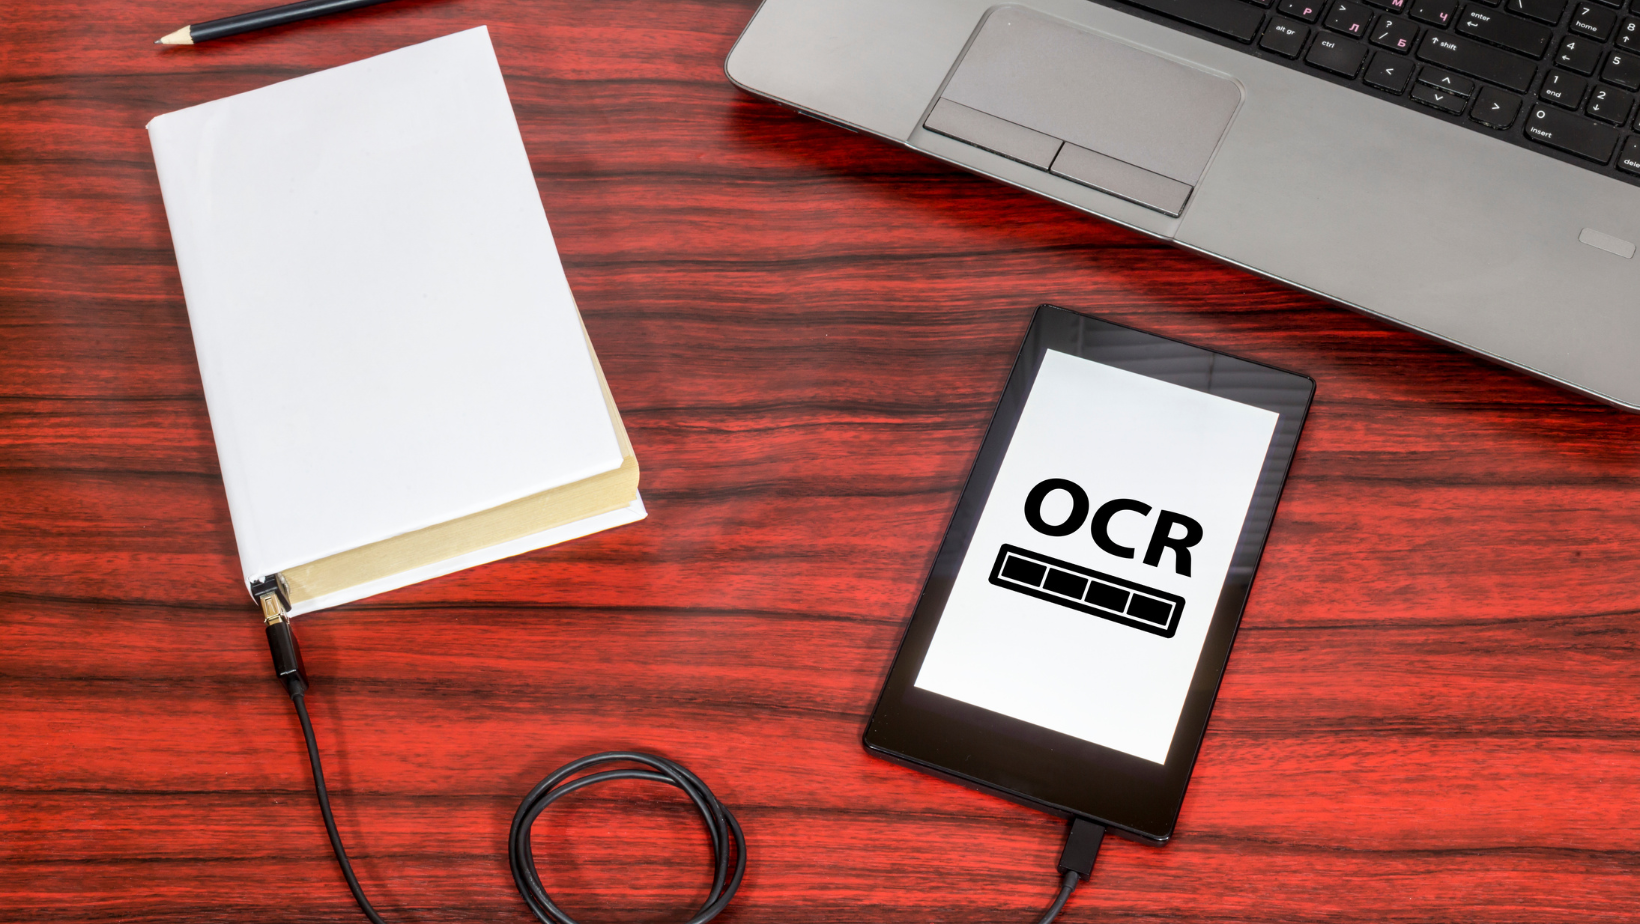 OCR data capture system software solutions for scanned paper documents & intelligent character recognition